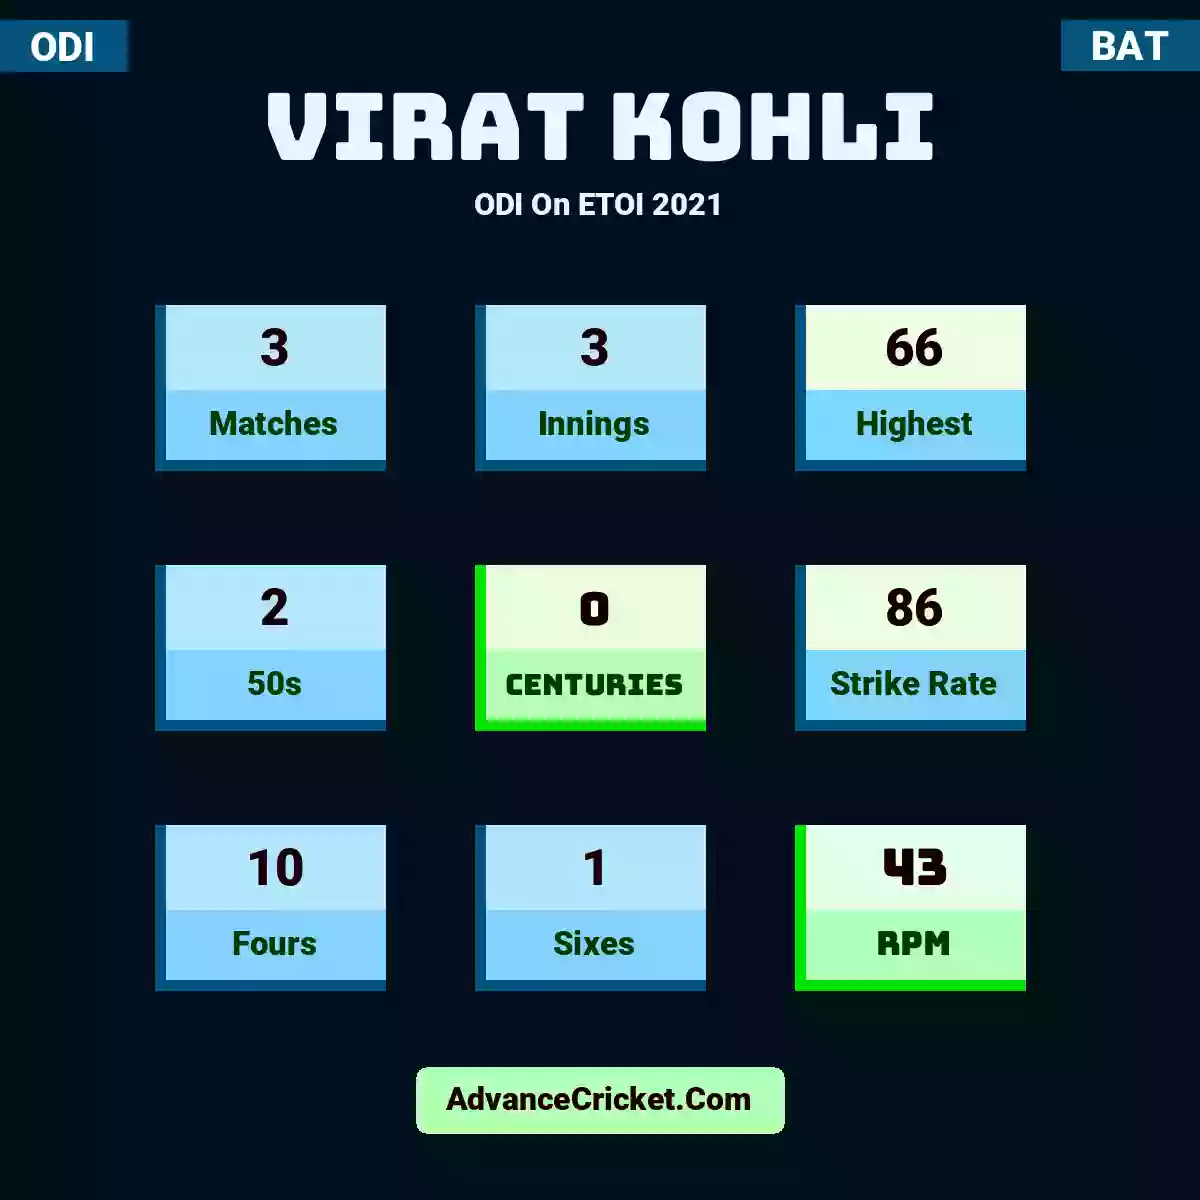 Virat Kohli ODI  On ETOI 2021, Virat Kohli played 3 matches, scored 66 runs as highest, 2 half-centuries, and 0 centuries, with a strike rate of 86. V.Kohli hit 10 fours and 1 sixes, with an RPM of 43.